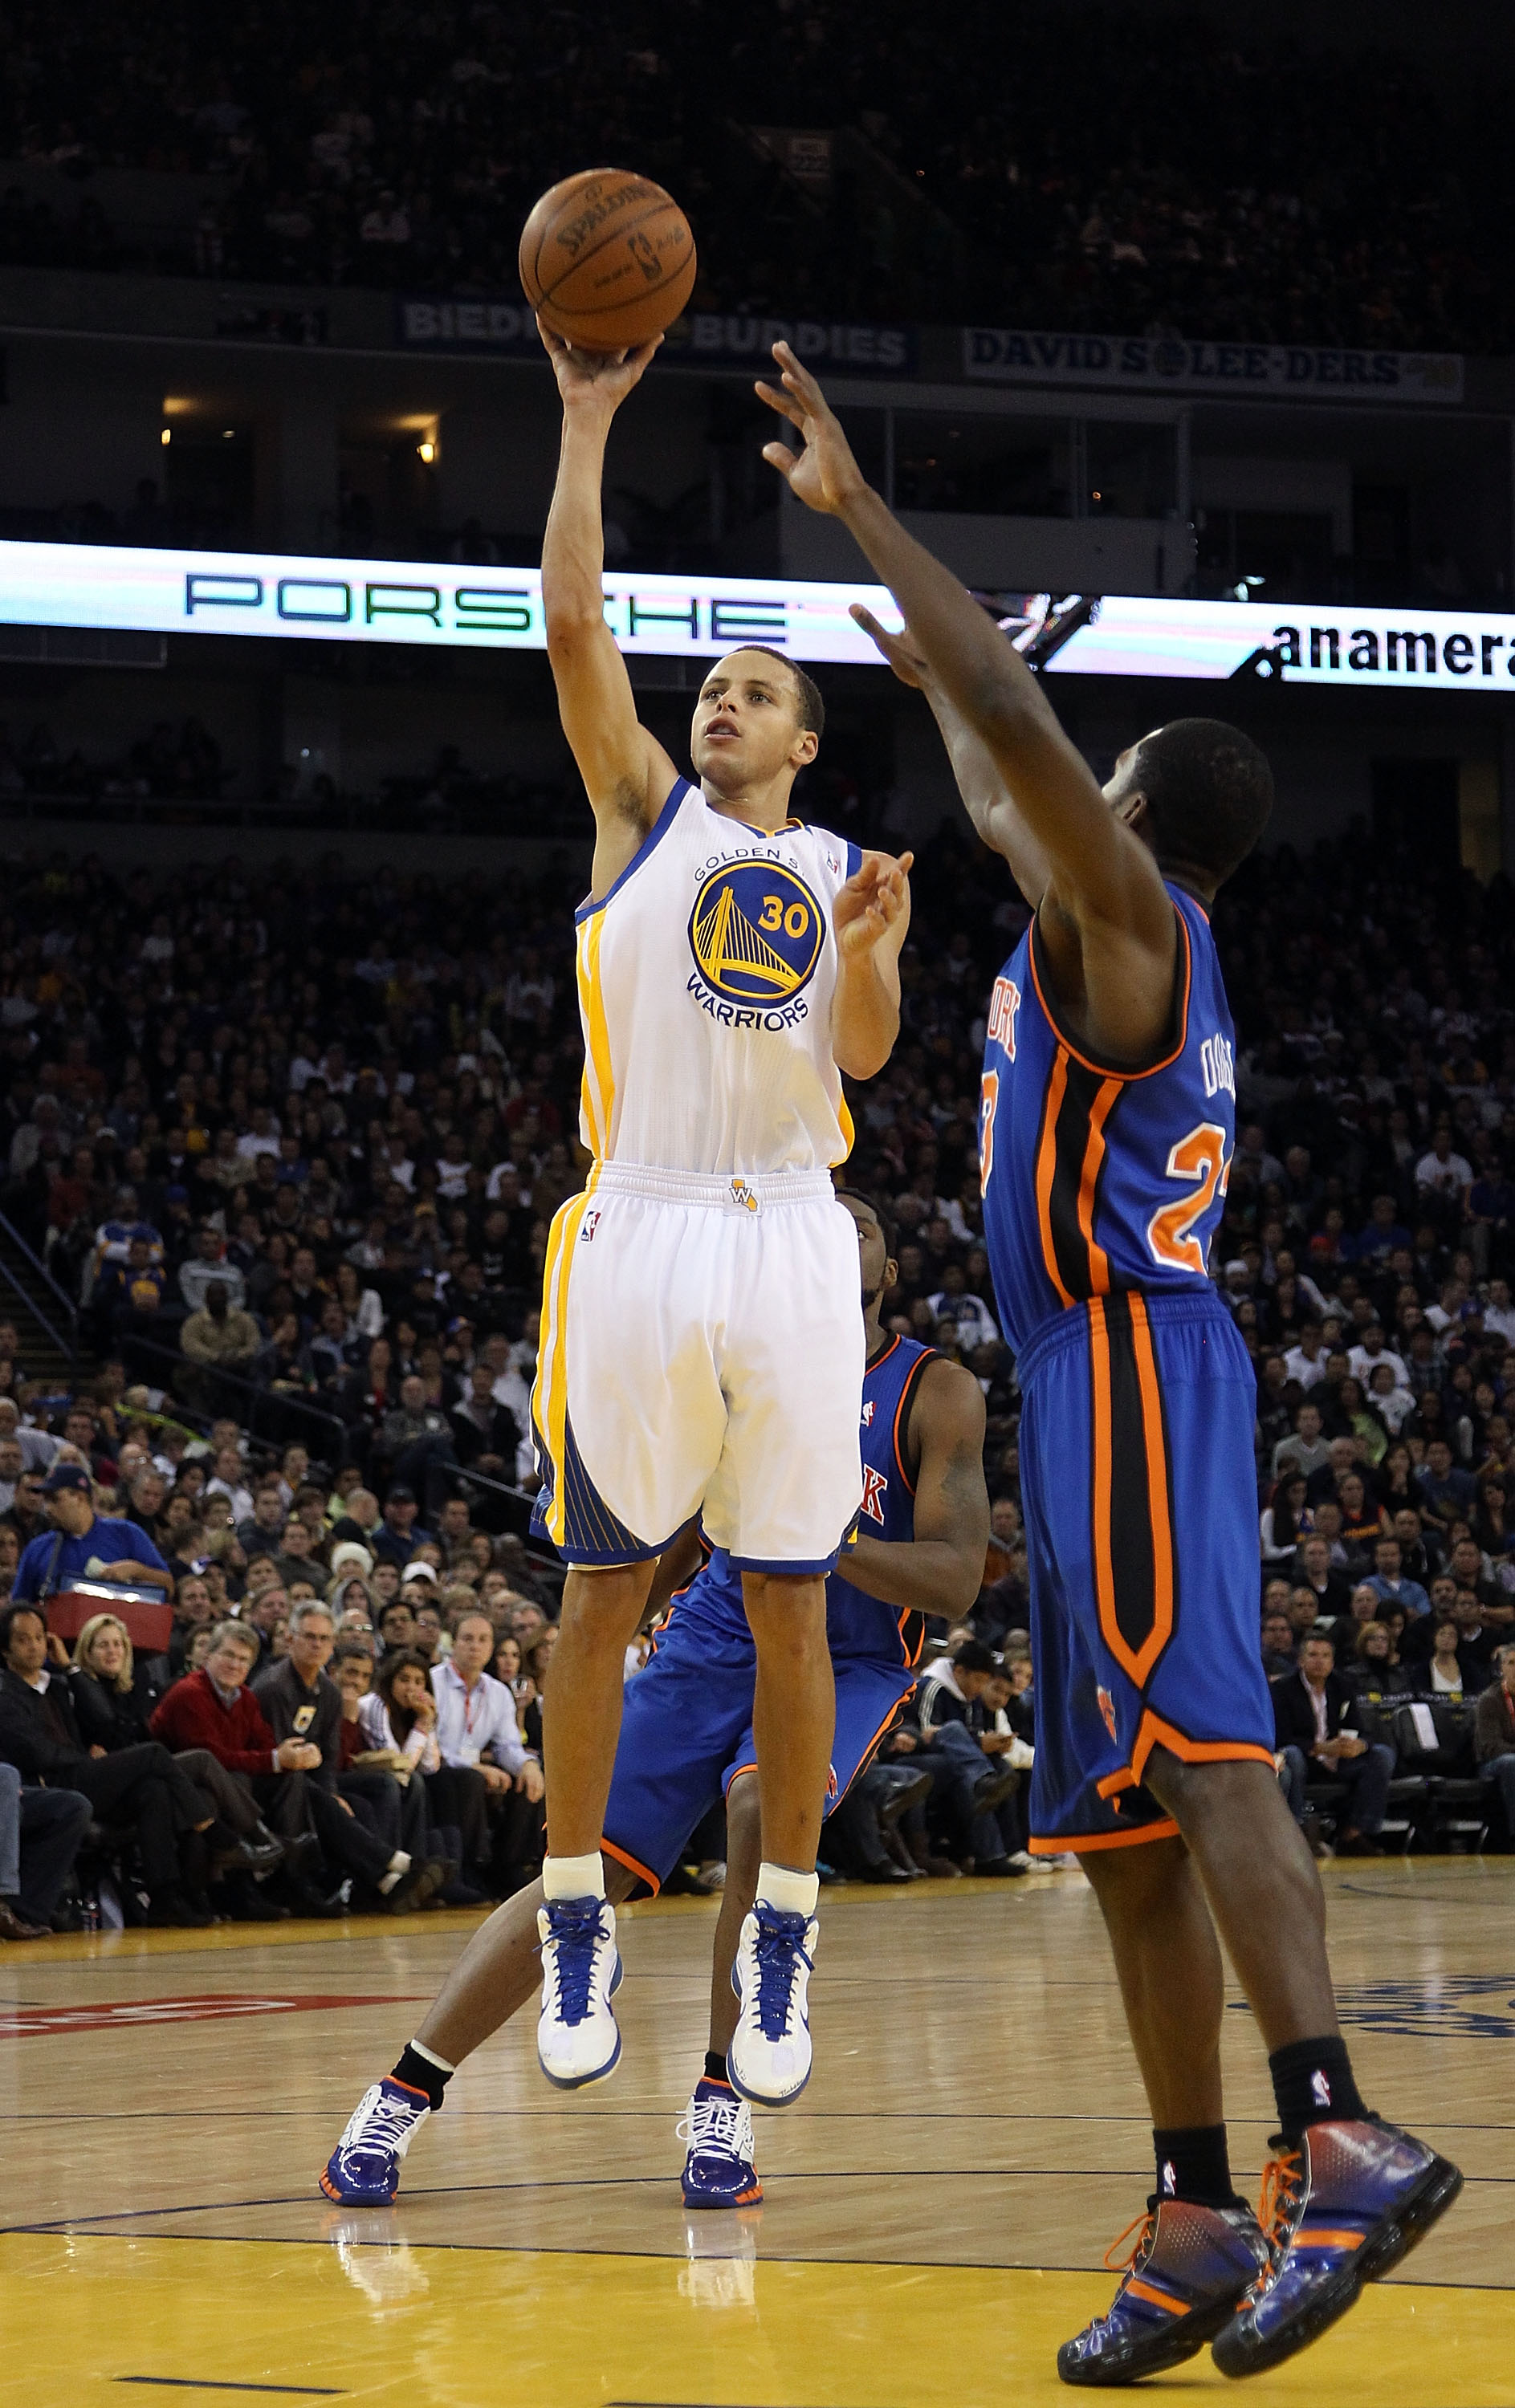 OAKLAND, CA - NOVEMBER 19:  Stephen Curry #30 of the Golden State Warriors in action against the New York Knicks at Oracle Arena on November 19, 2010 in Oakland, California. NOTE TO USER: User expressly acknowledges and agrees that, by downloading and or